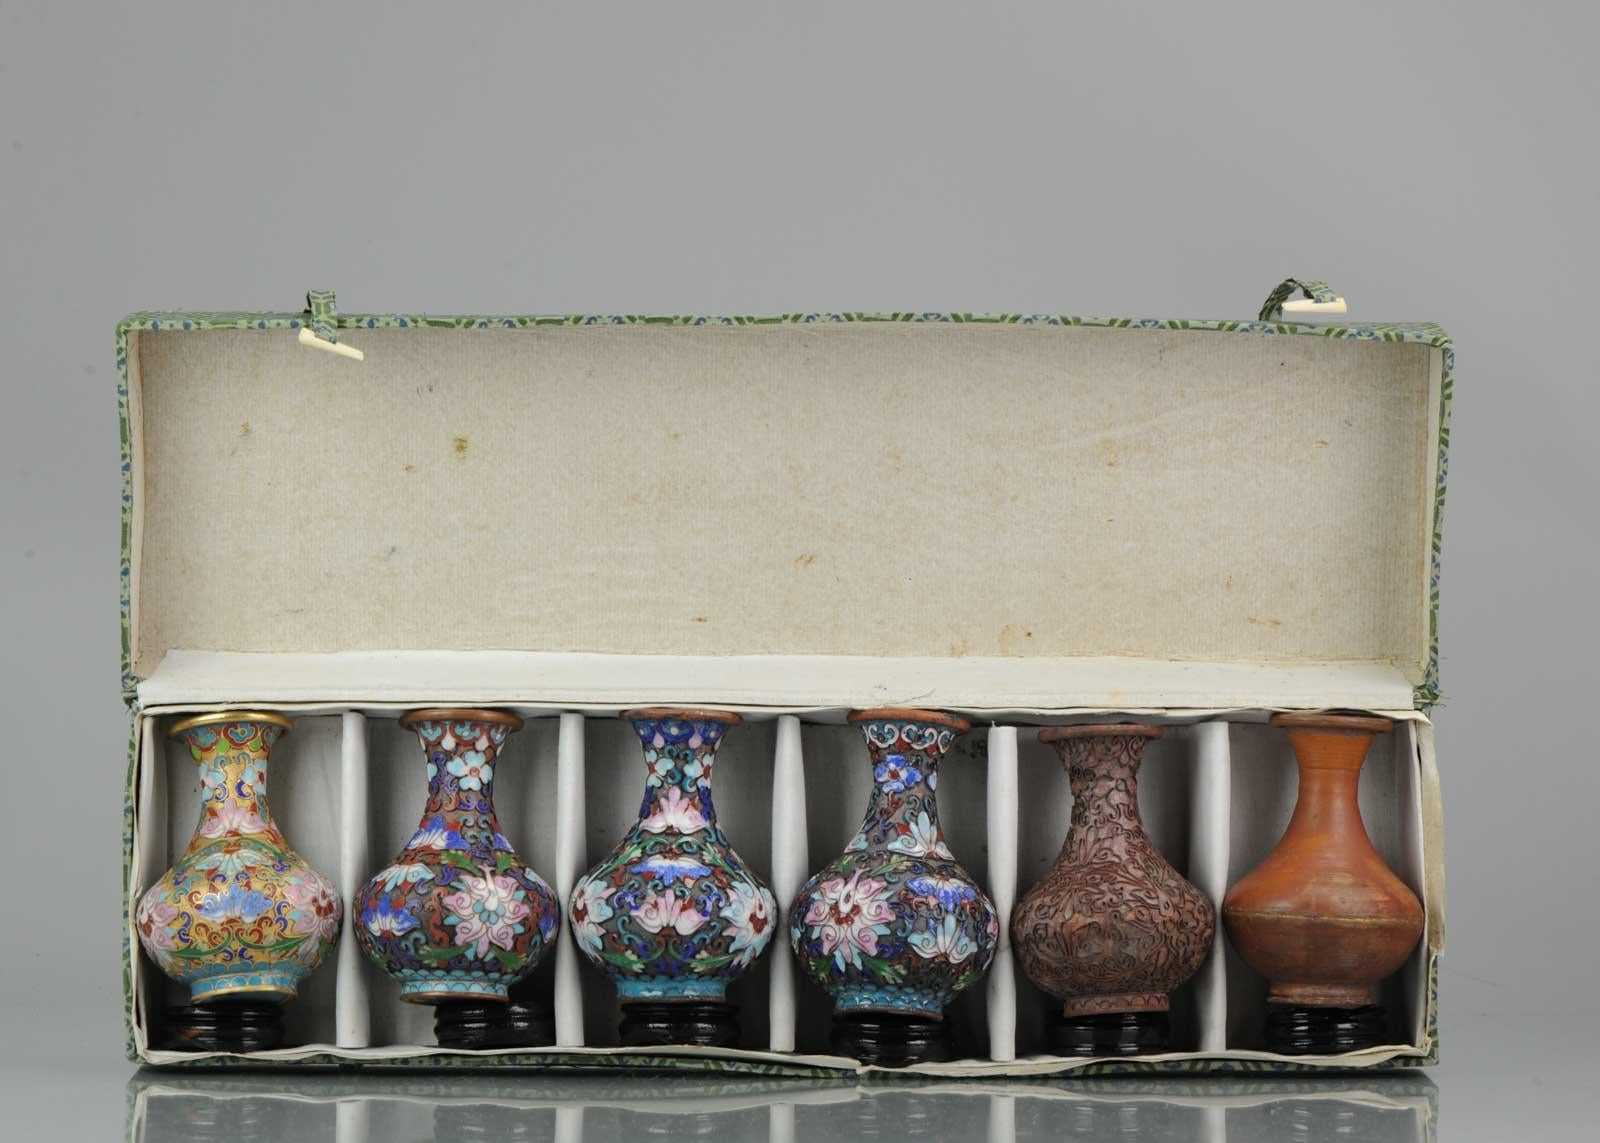 Japanese Set of 6 Chinese Manufacturing Process Colorfull Vase CLoisonne Enamel, 20th Cen For Sale